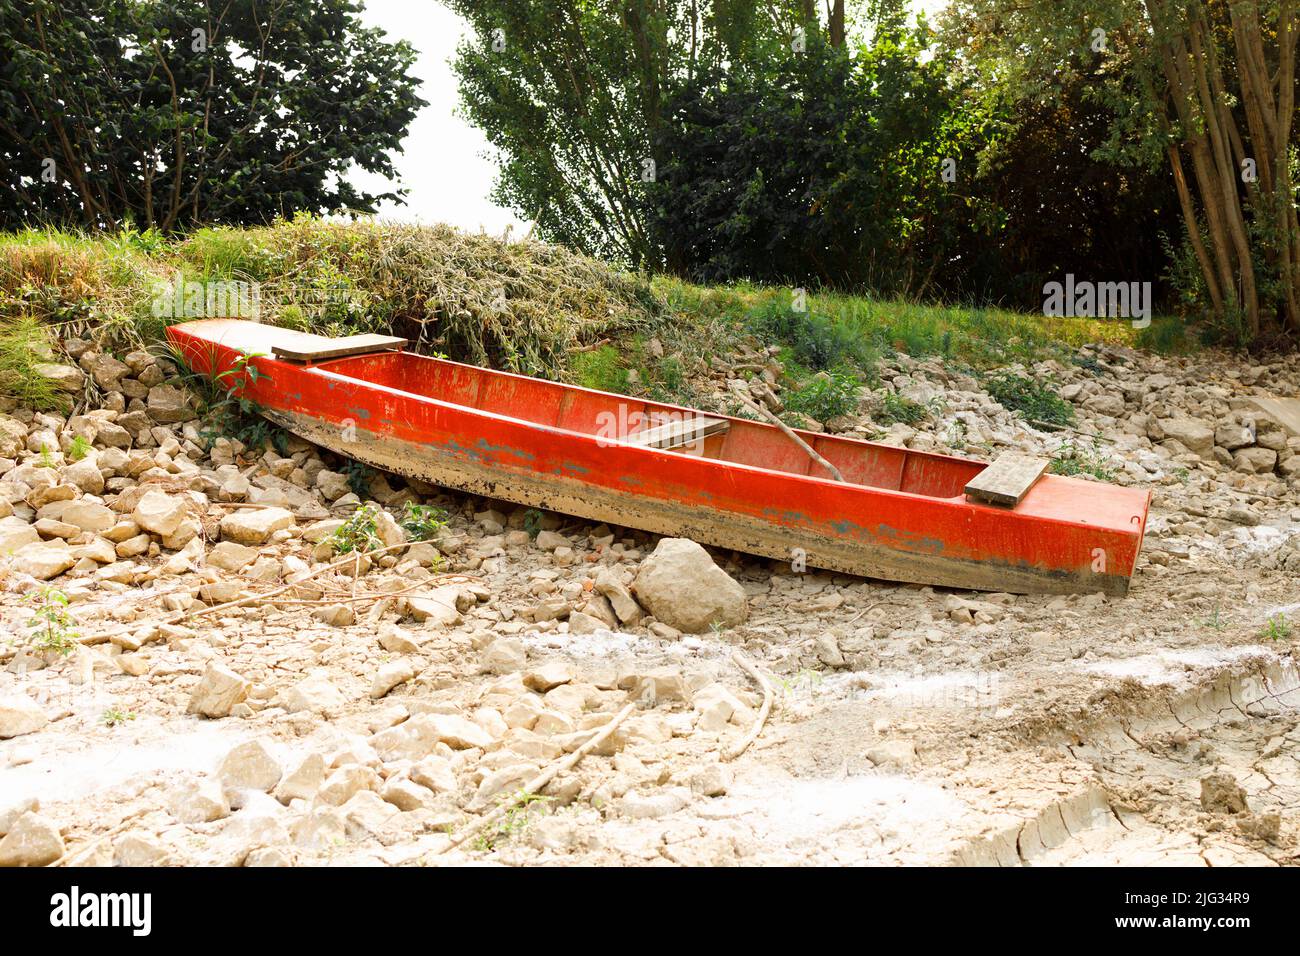 Fishing boat on the bank of a dried out lake due to harsh summer heatwaves and climate change Stock Photo